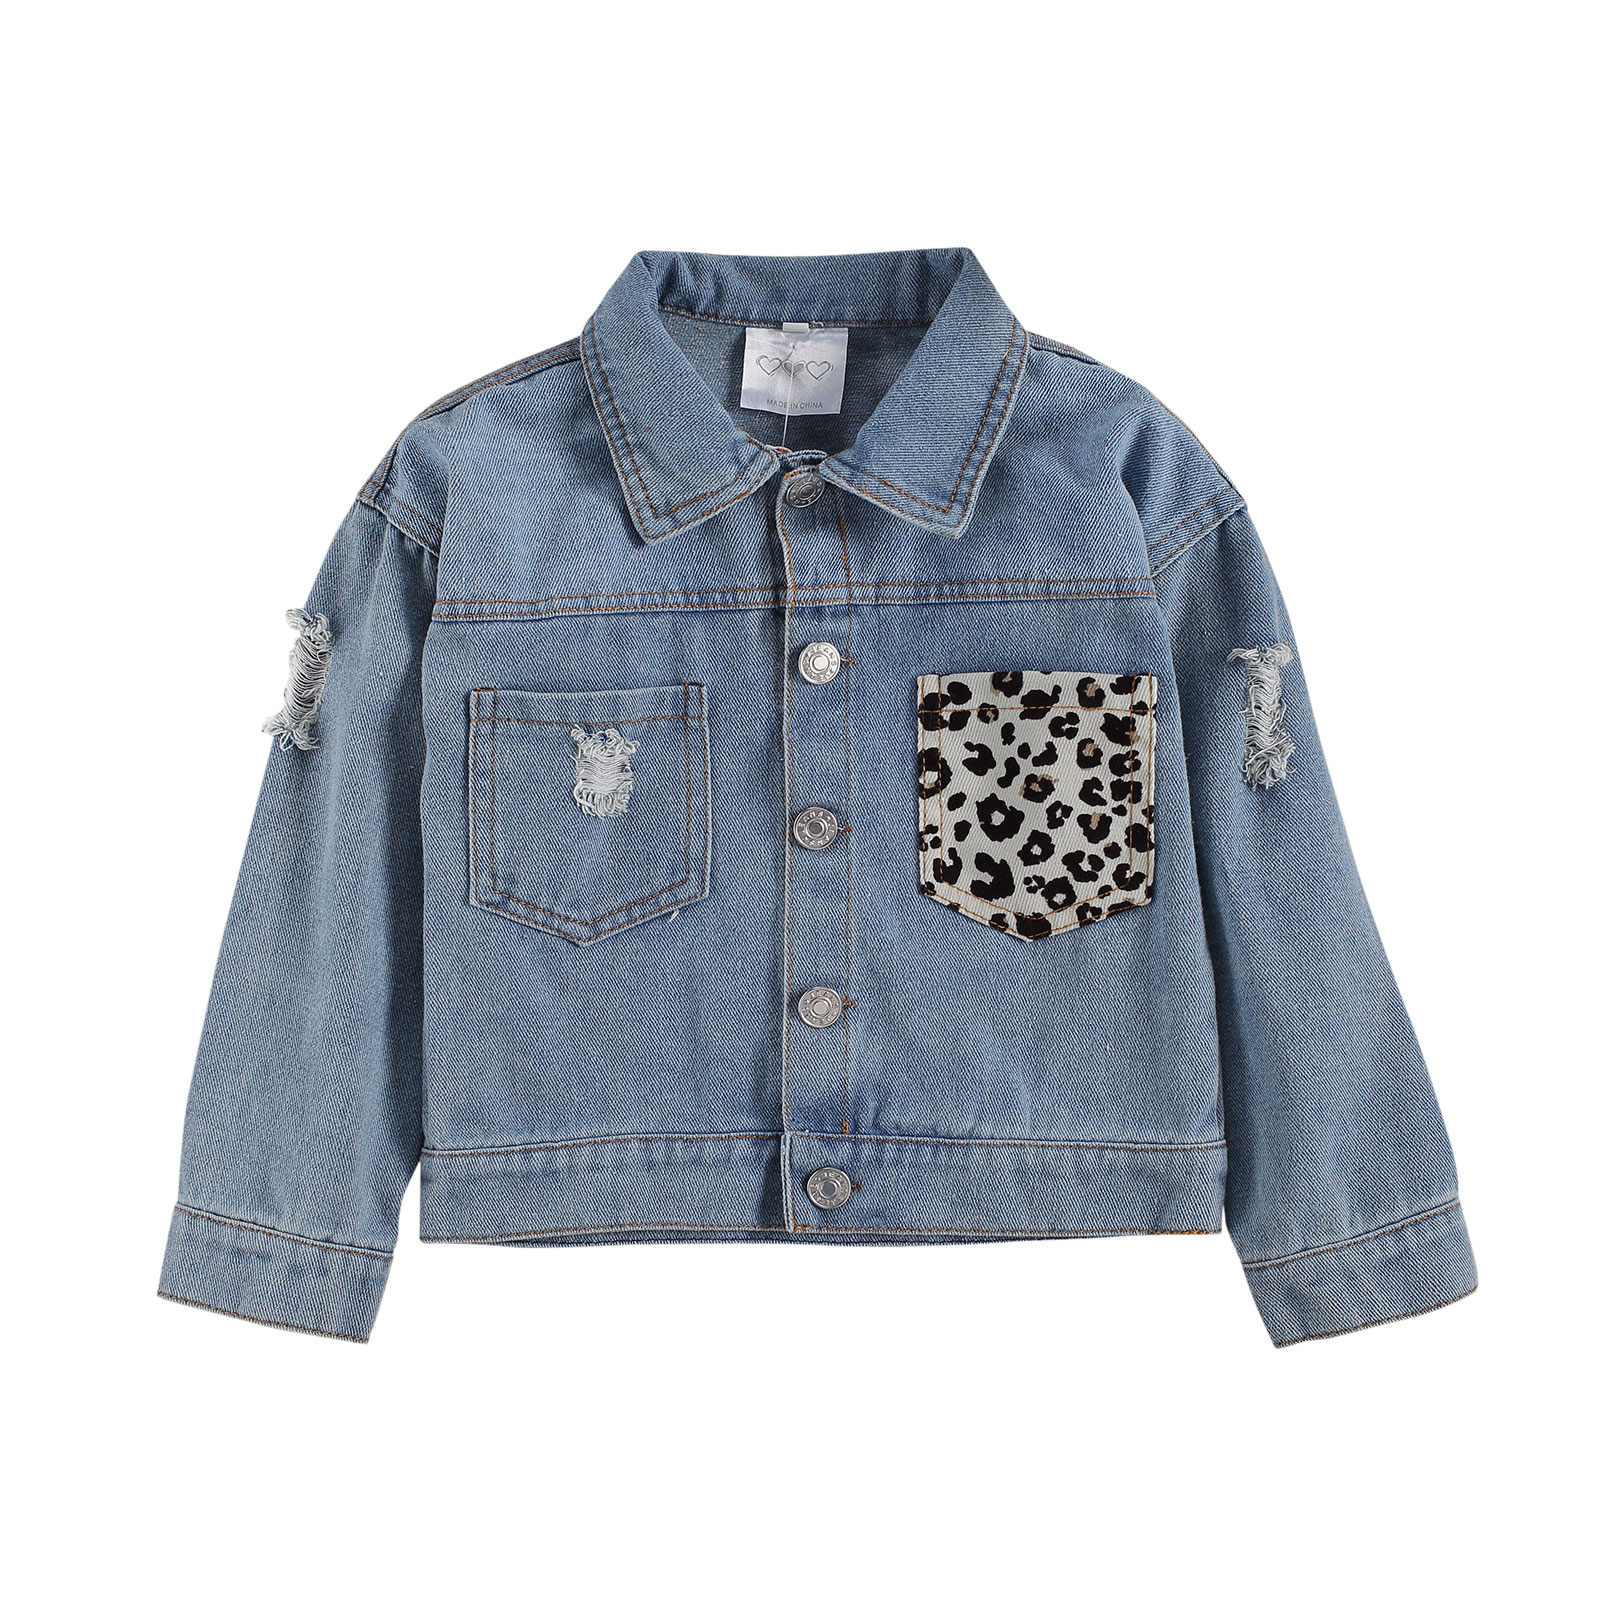 Toddler Baby Girl Coat Long Sleeve Denim Jacket Sequin Pockets Ripped Jean Jacket Outwear 1-6T - image 1 of 9